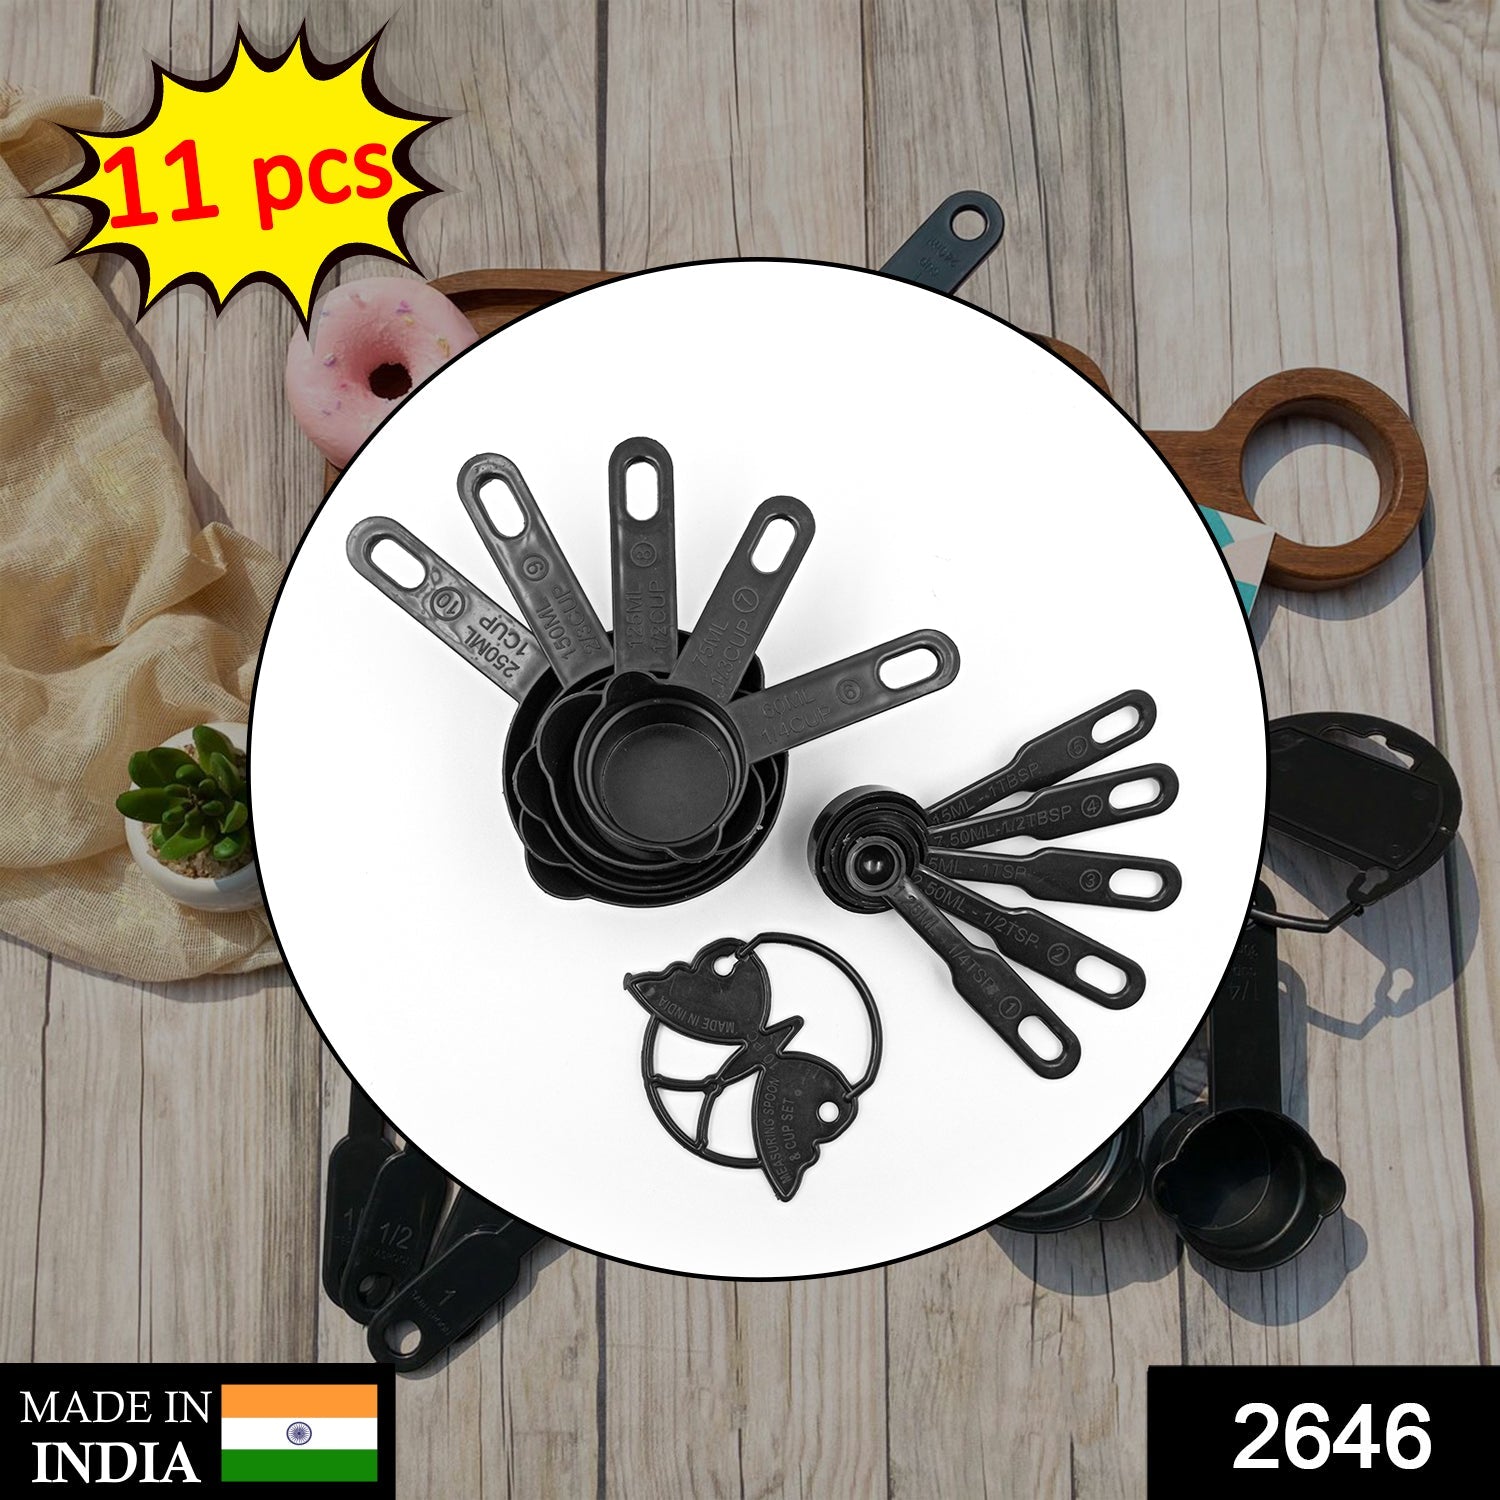 2646 Plastic Measuring Cups and Spoons (11 Pcs, Black) With butterfly shape Holder